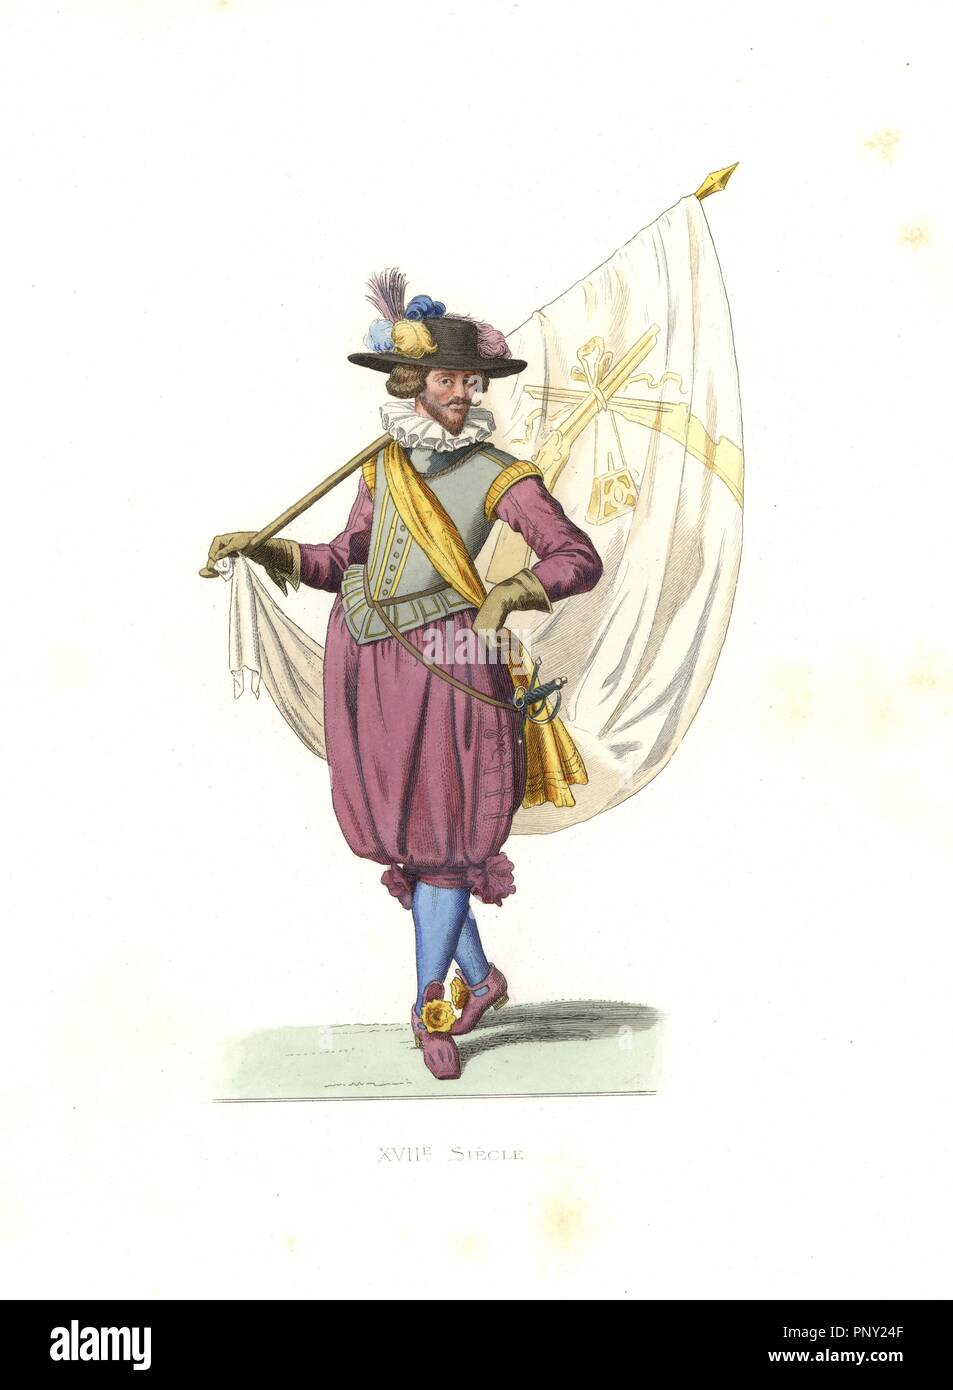 Standard bearer for a company of arquebusiers, 17th century. Handcolored illustration by E. Lechevallier-Chevignard, lithographed by A. Didier, L. Flameng, F. Laguillermie, from Georges Duplessis's 'Costumes historiques des XVIe, XVIIe et XVIIIe siecles' (Historical costumes of the 16th, 17th and 18th centuries), Paris 1867. The book was a continuation of the series on the costumes of the 12th to 15th centuries published by Camille Bonnard and Paul Mercuri from 1830. Georges Duplessis (1834-1899) was curator of the Prints department at the Bibliotheque nationale. Edmond Lechevallier-Chevignard Stock Photo